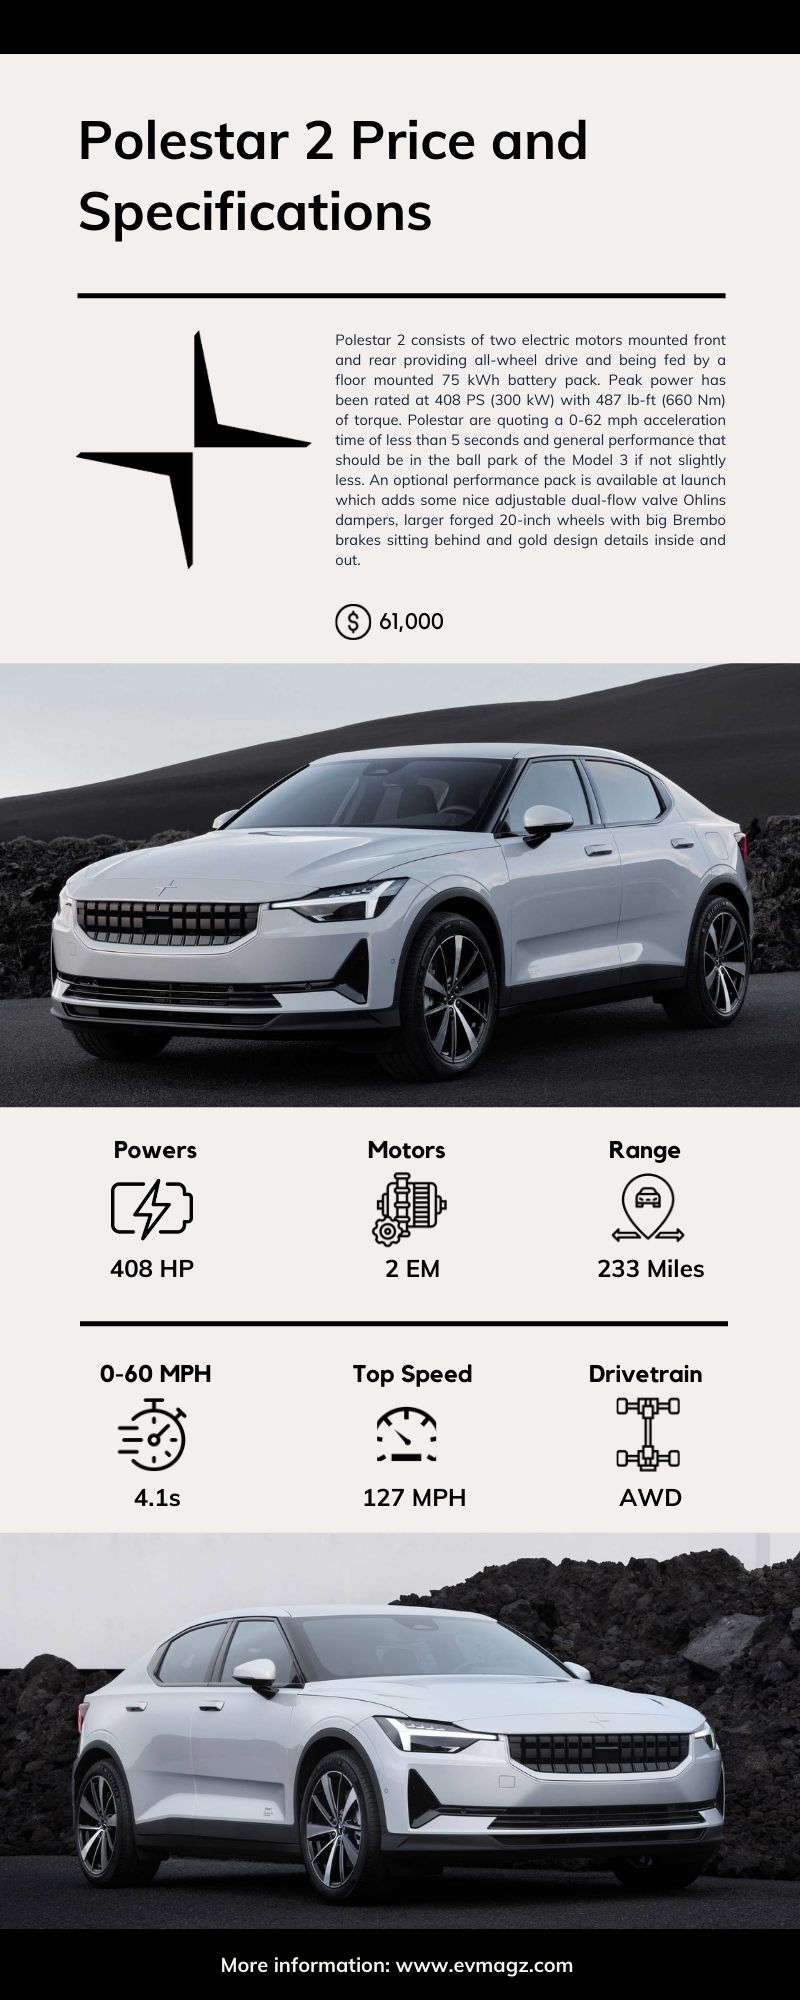 Polestar 2 Price and Specifications